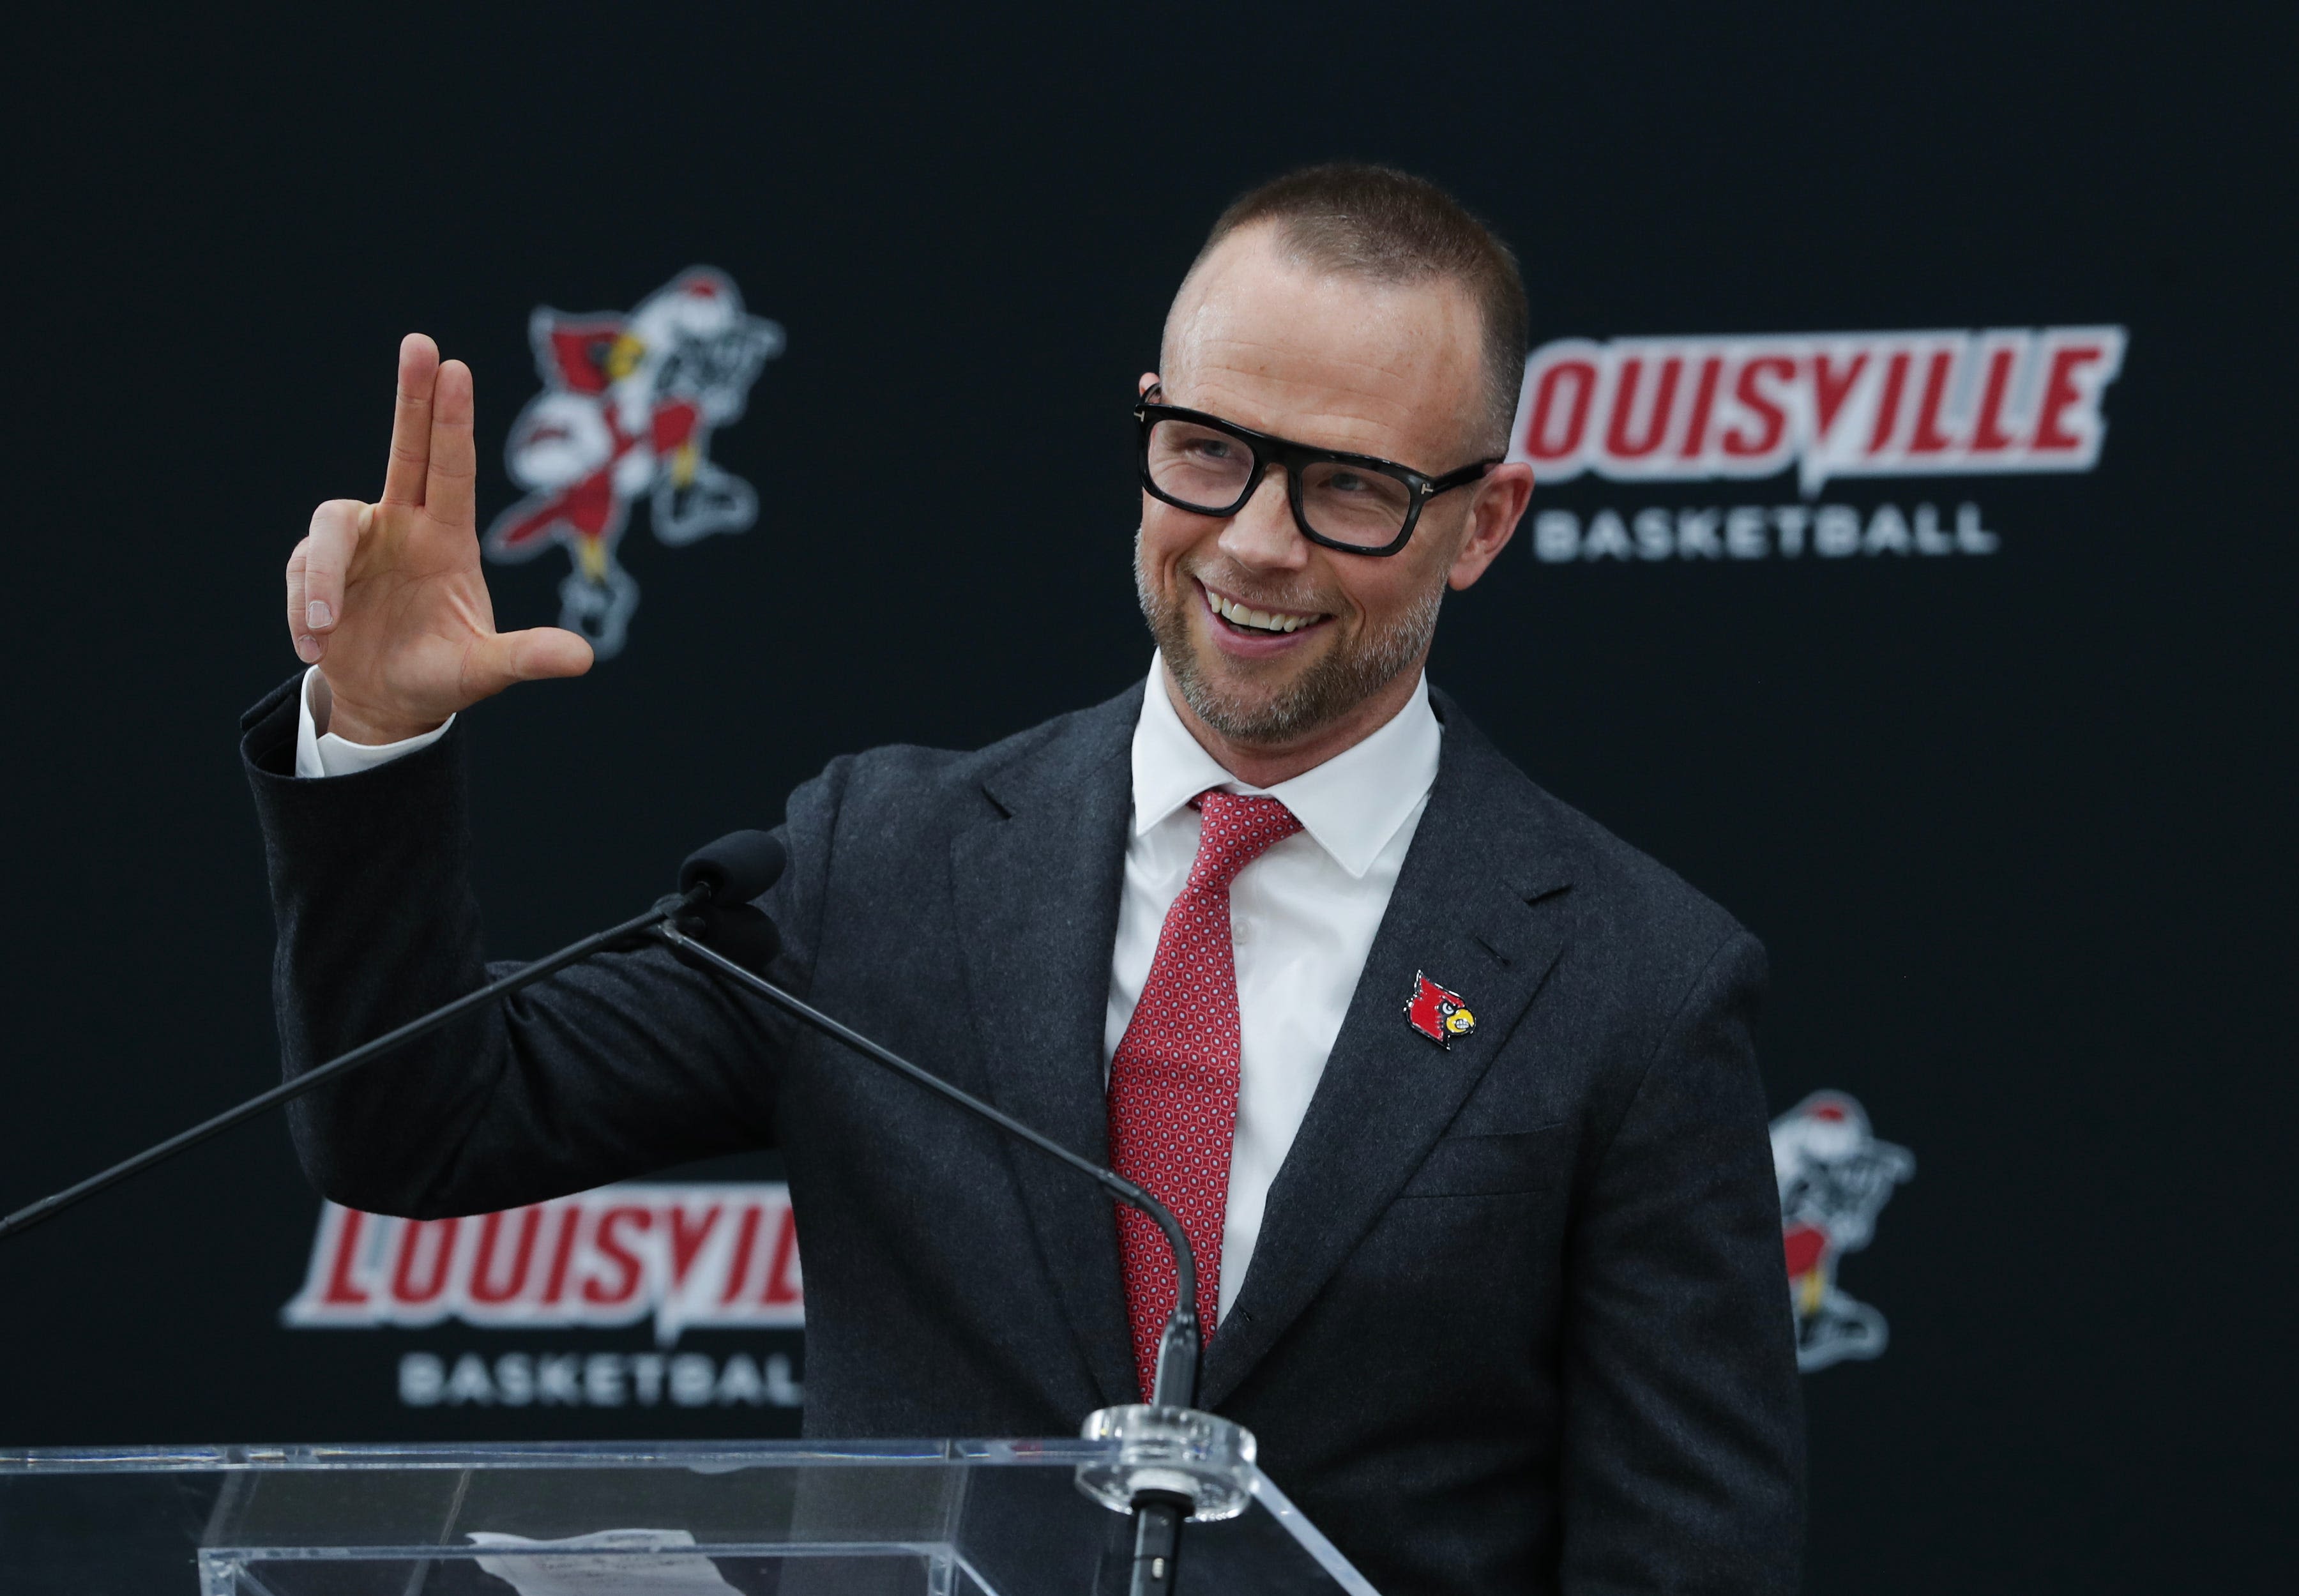 Louisville basketball transfer haul among best. Here's why analytics guru is high on Cards